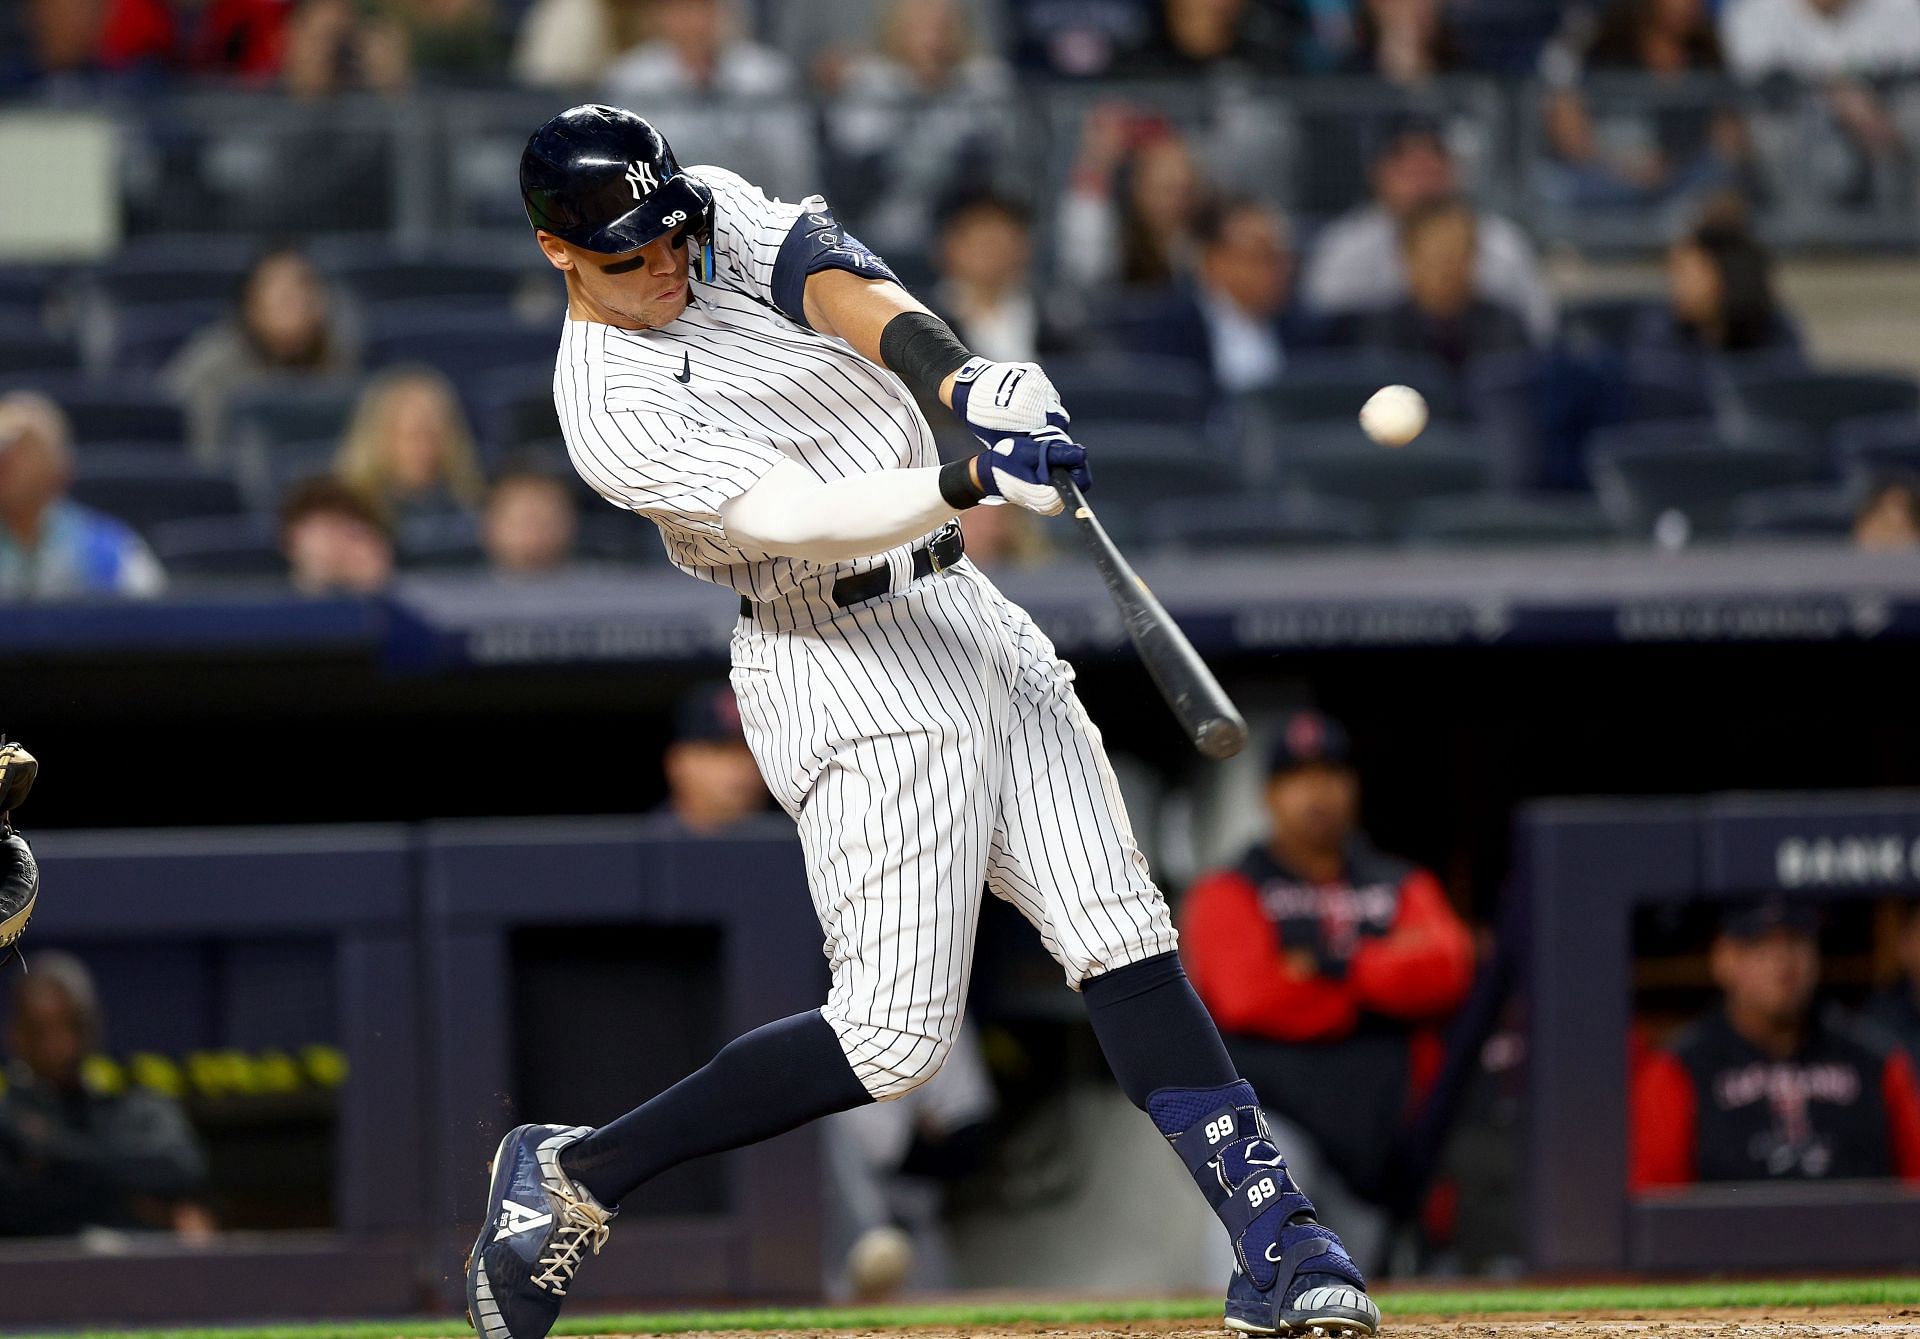 New York Yankees news: Team announces upcoming Star Wars night; 3-time All- Star blasts homer 415 feet to give club best record in AL - April 29